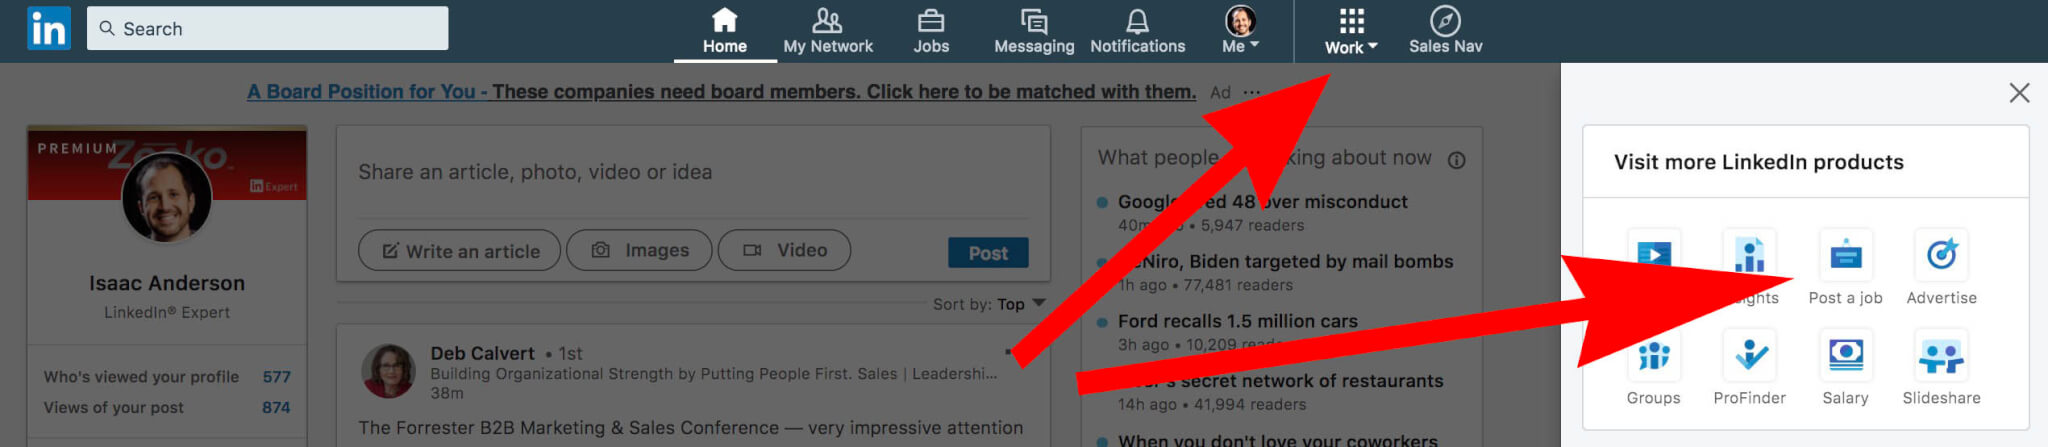 How to post a job on Linkedin - finding the post a job icon in Linkedin